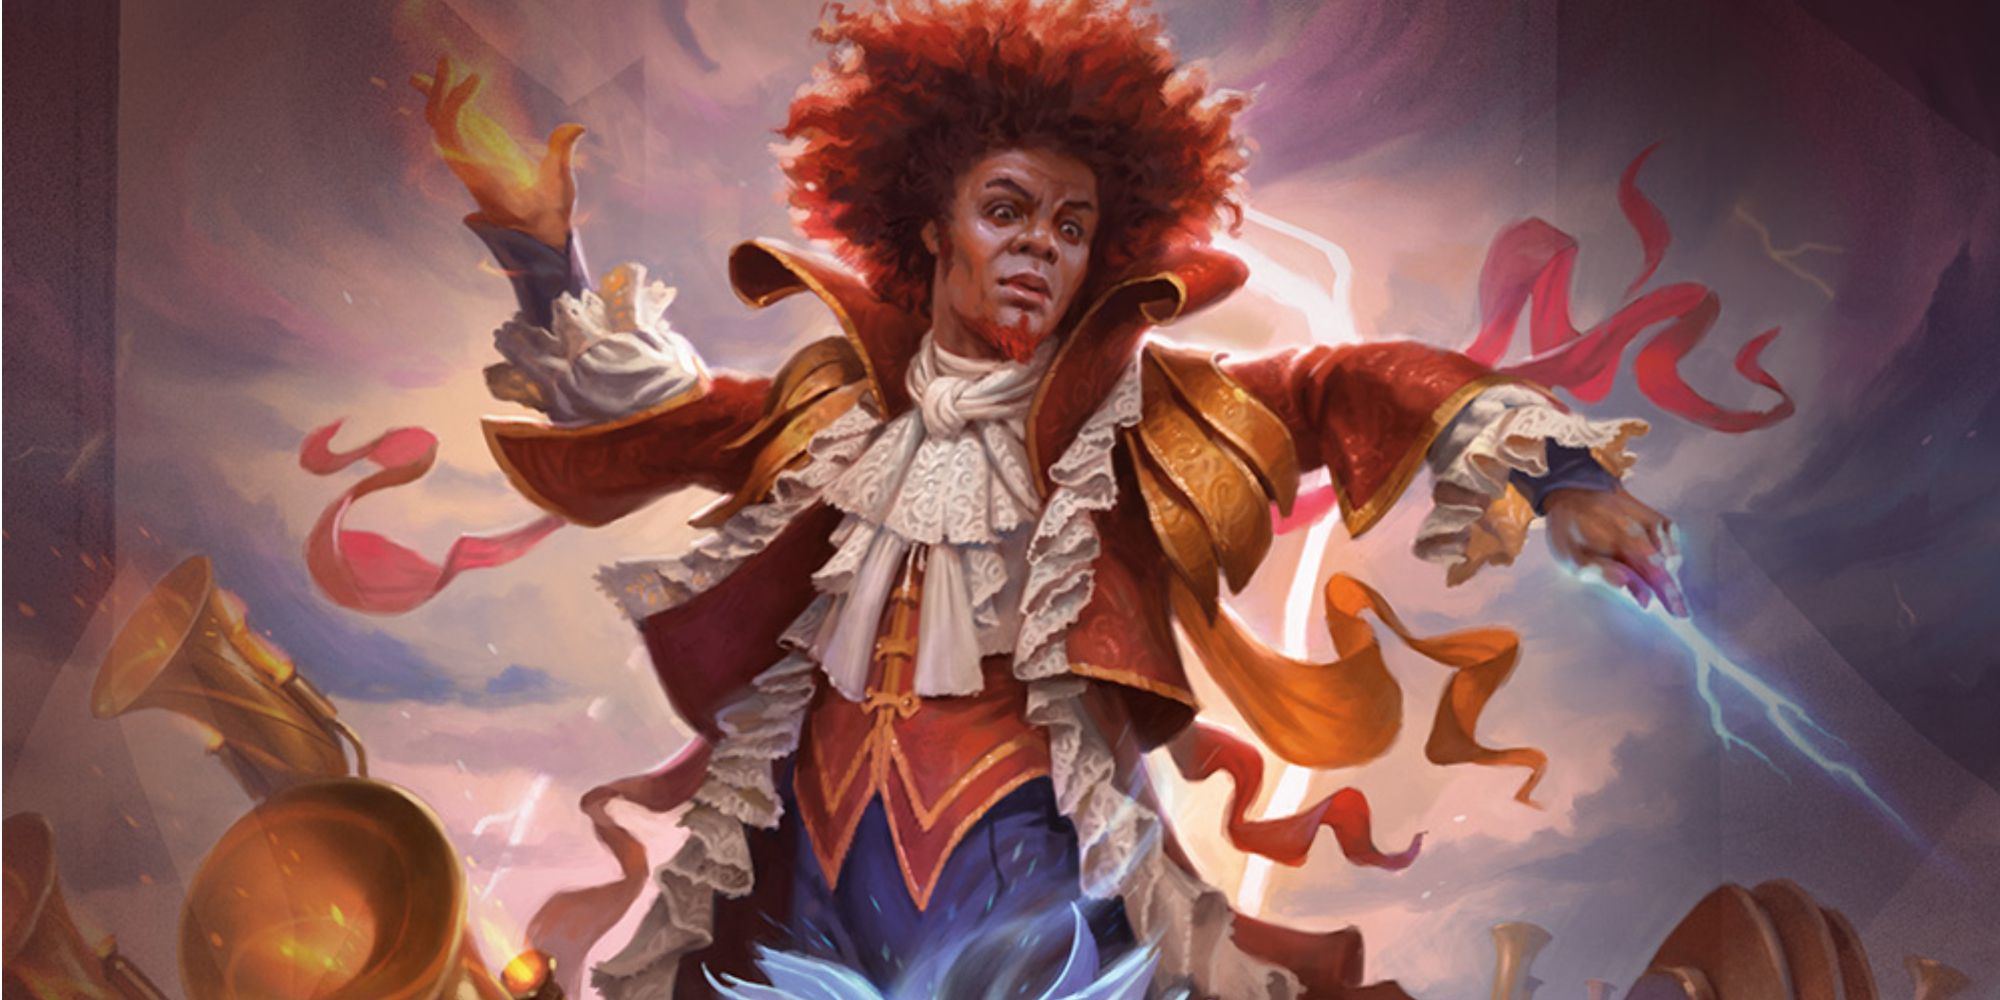 Dungeons & Dragons and MTG Strixhaven promo image with a spellcaster wielding fire and lightning.